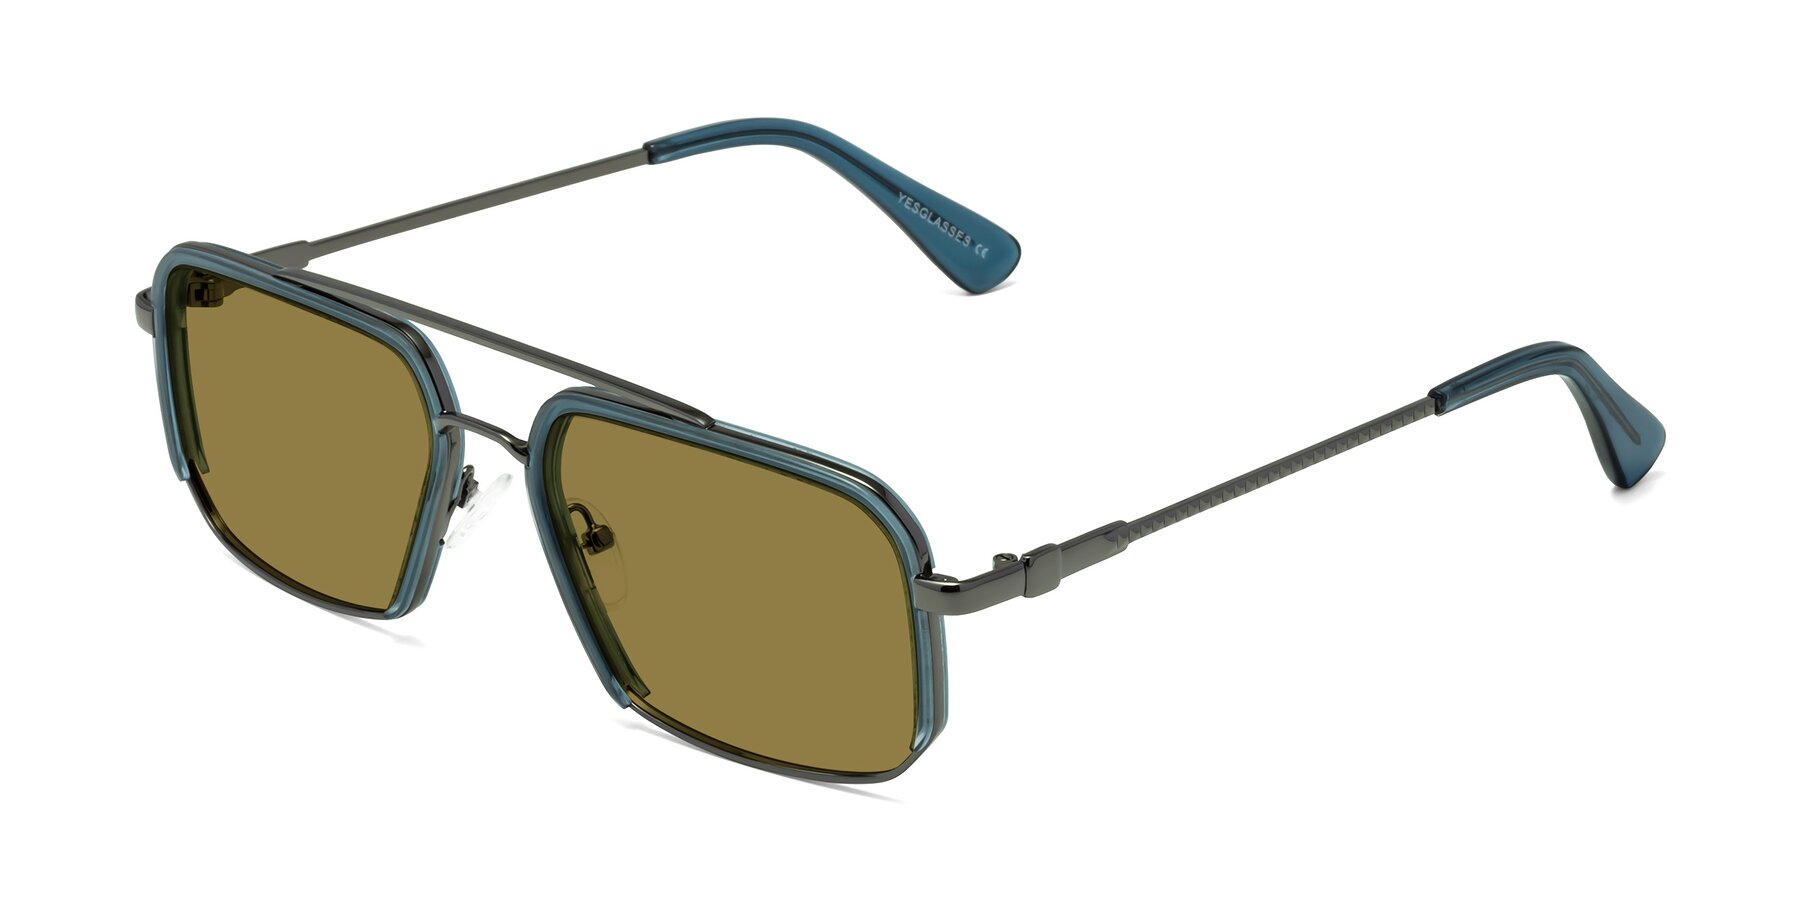 Angle of Dechter in Teal-Gunmetal with Brown Polarized Lenses